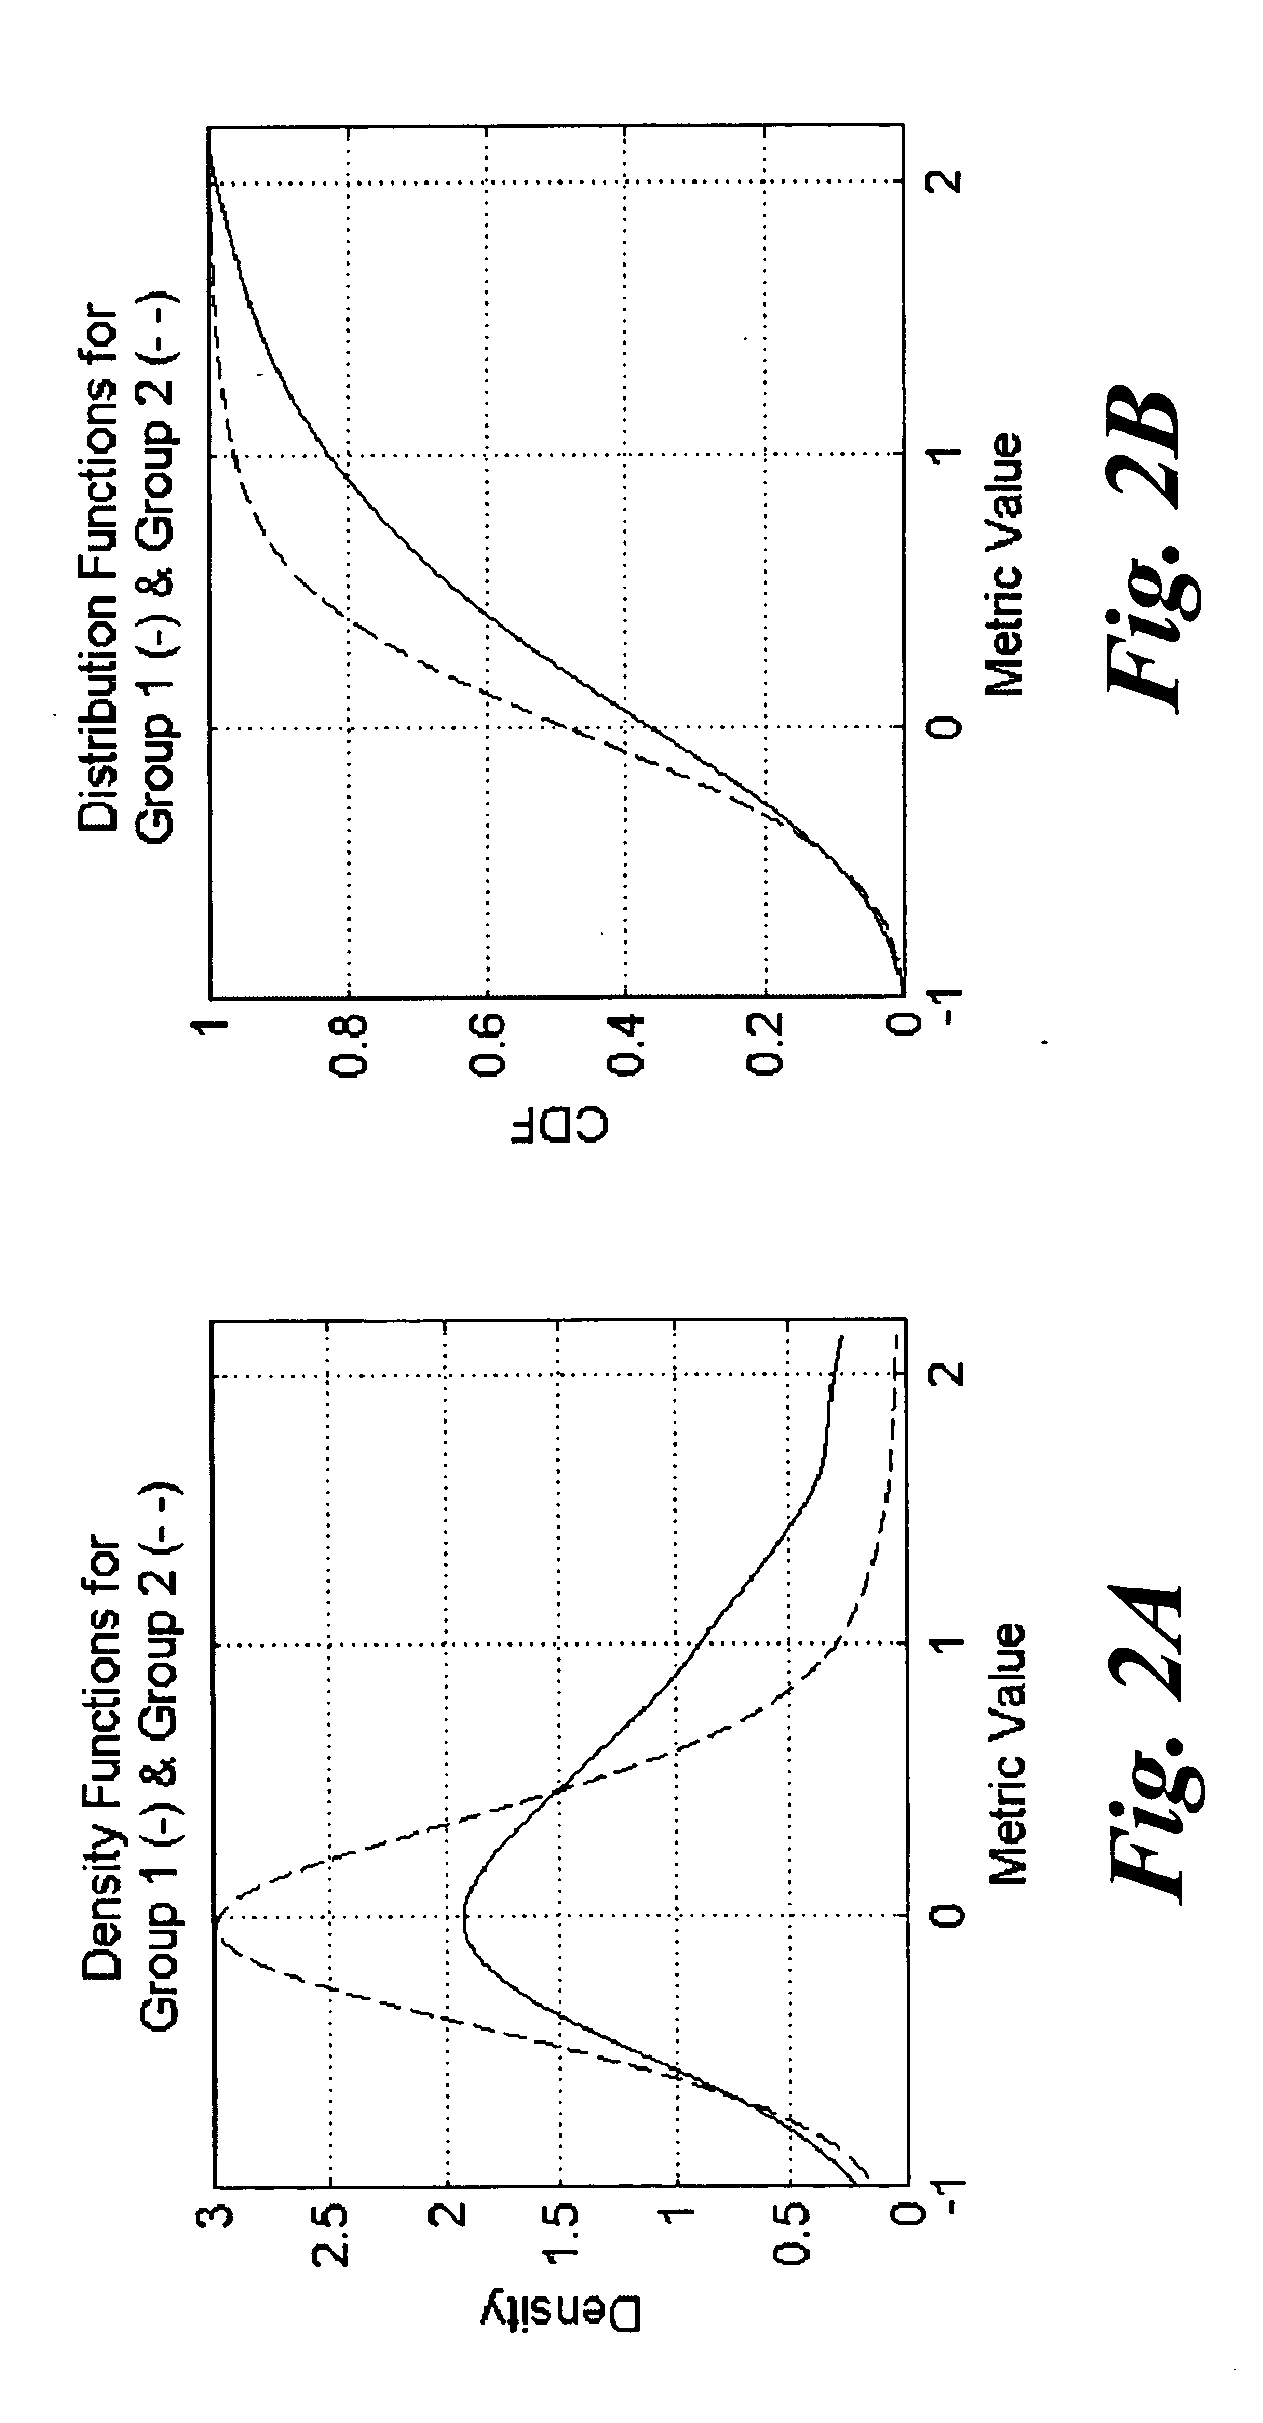 General method of classifying plant embryos using a generalized Lorenz-Bayes classifier